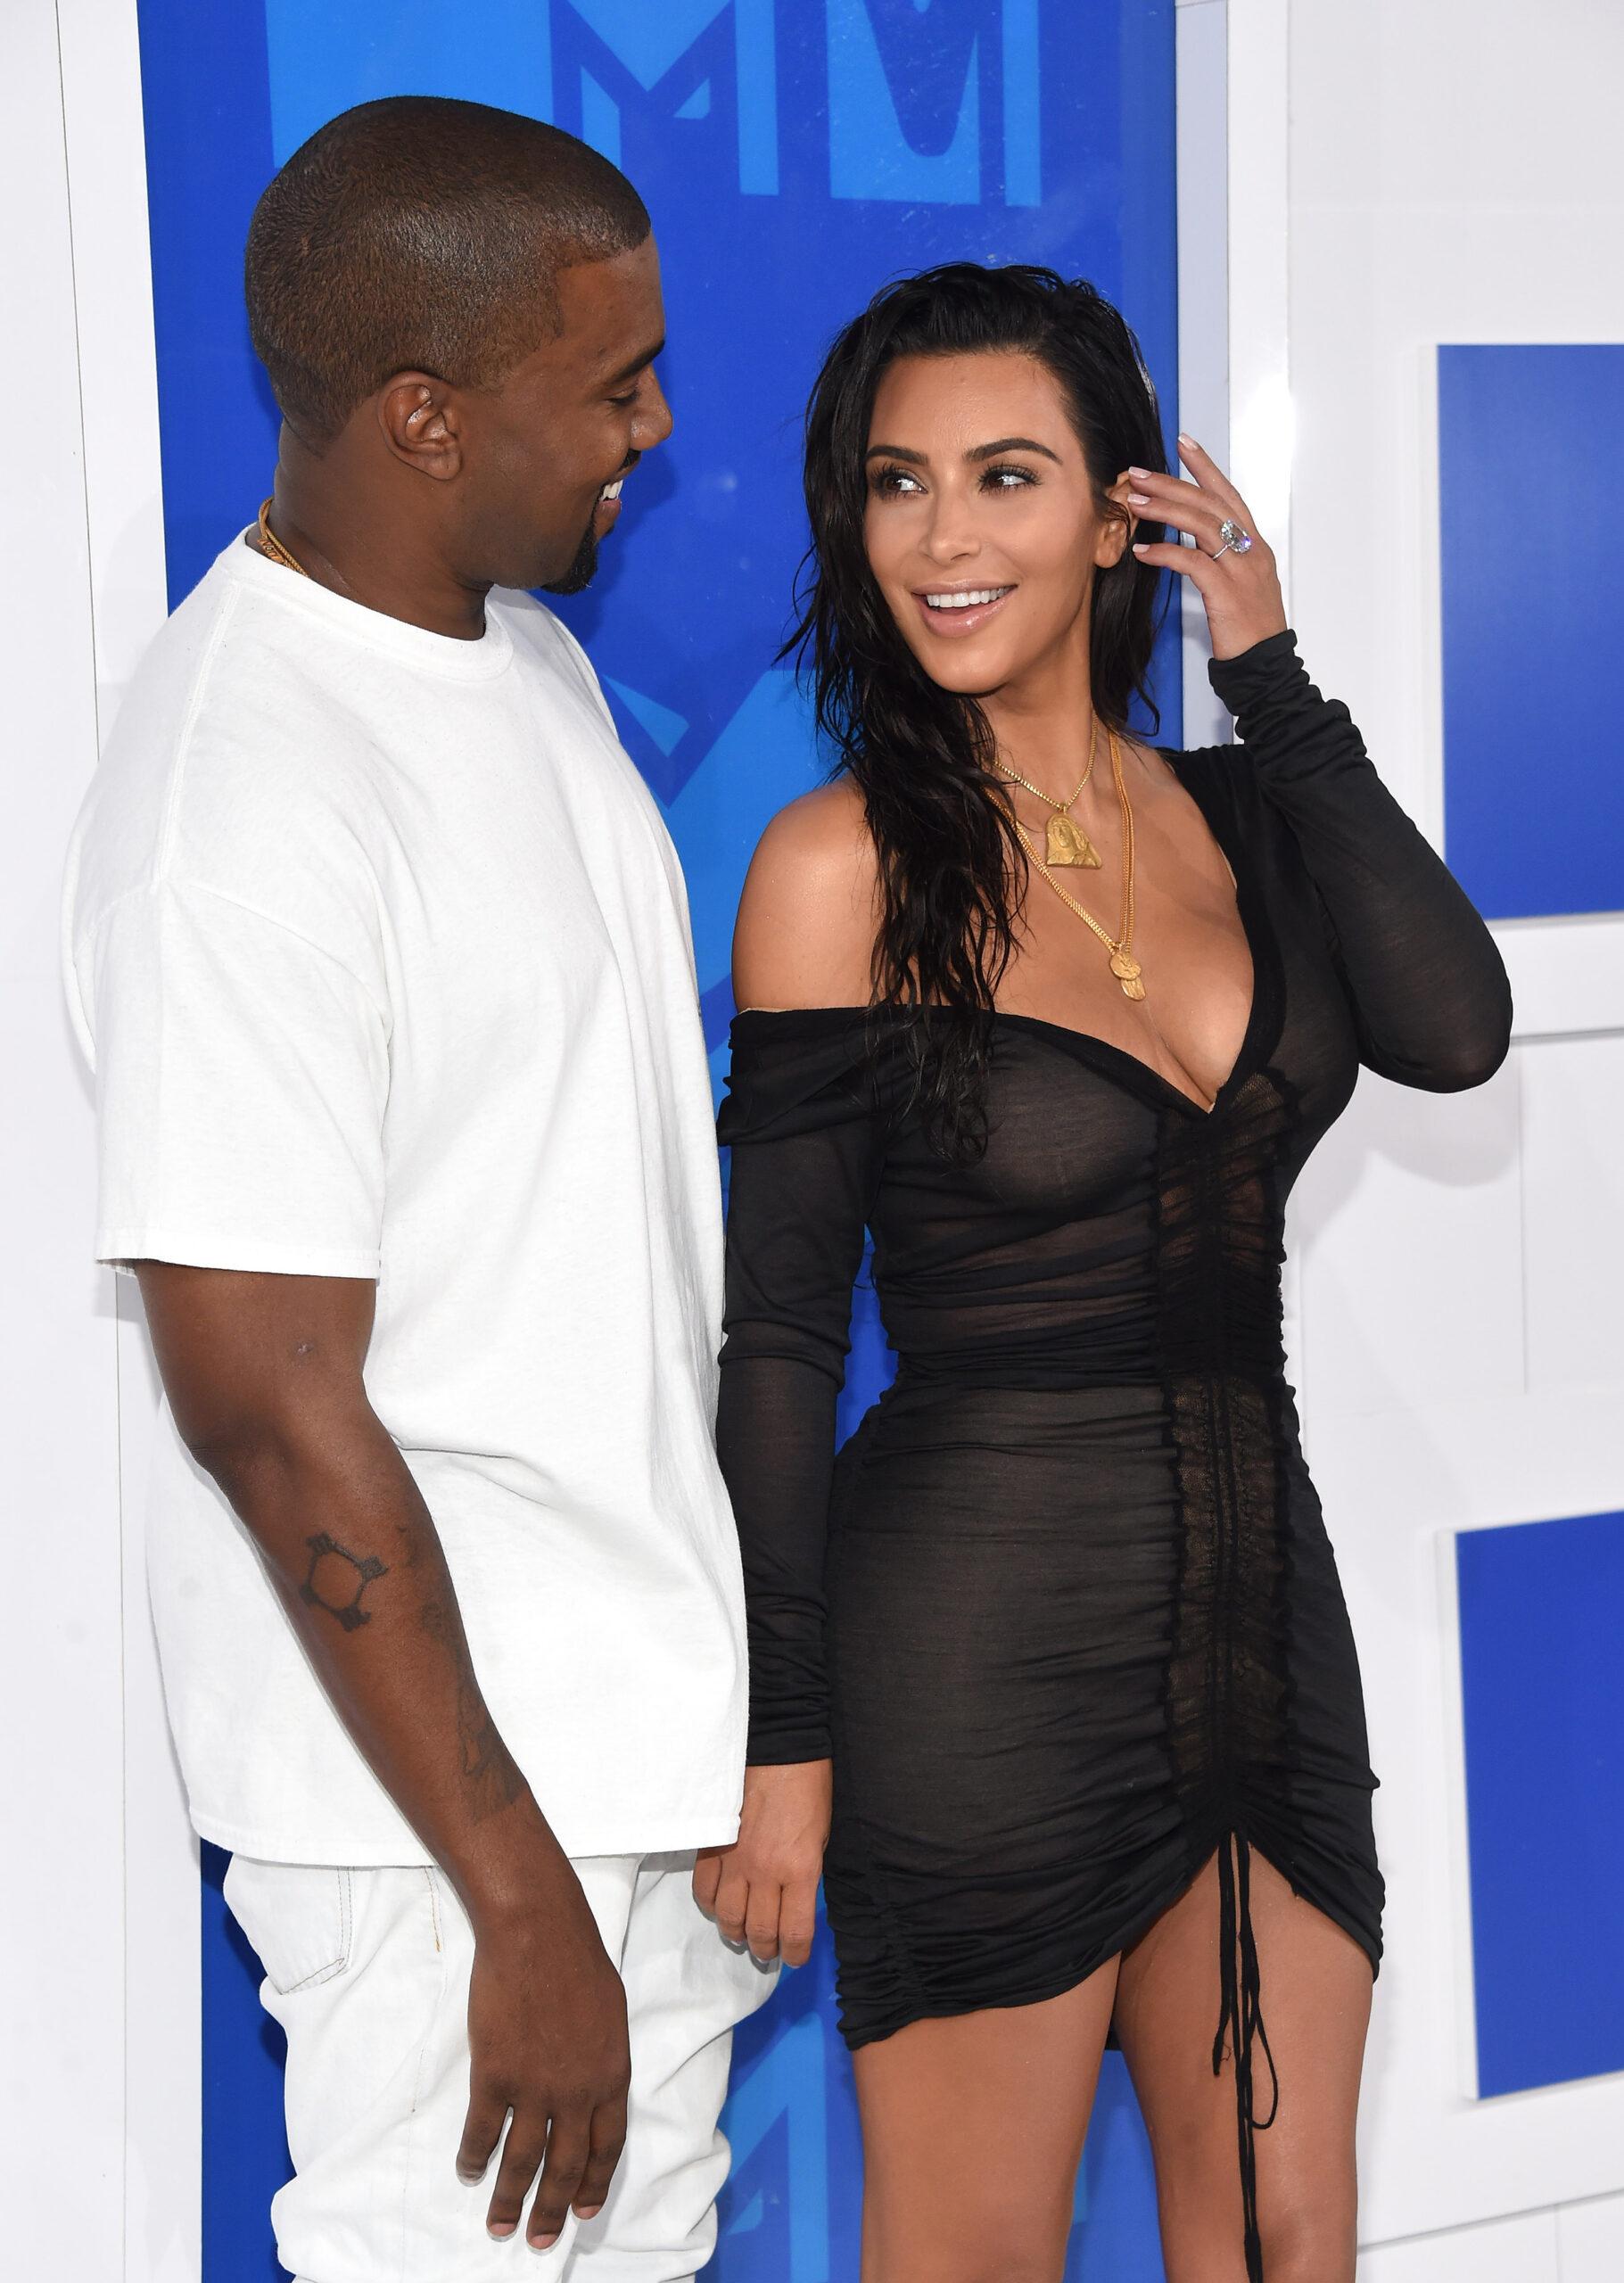 Kanye West Breaks His Silence On Divorce, Let's Focus On 'Our Beautiful Children'